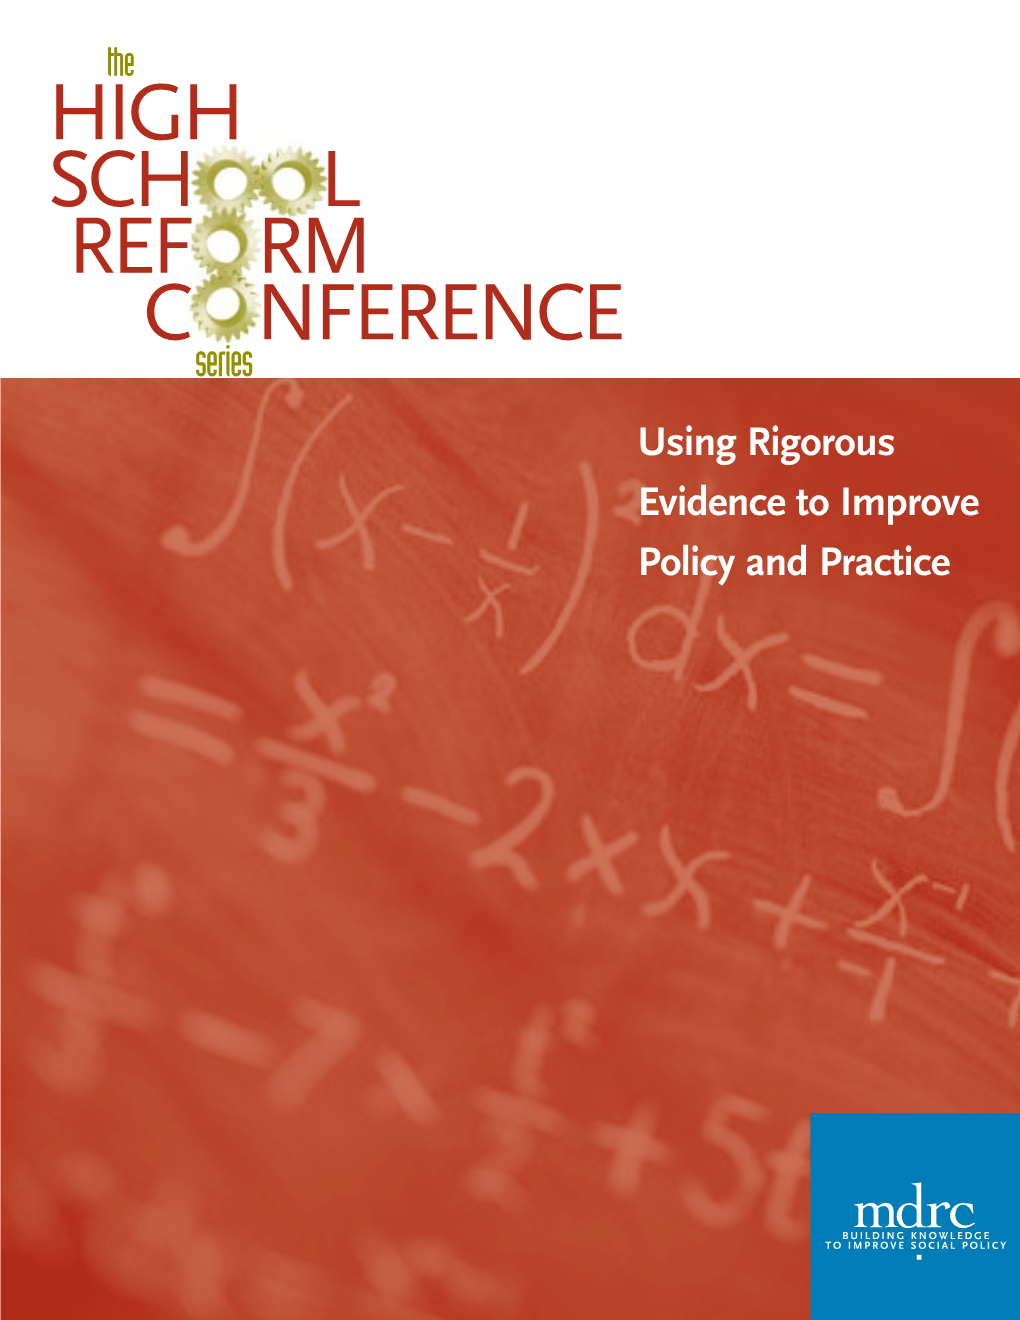 Using Rigorous Evidence to Improve Policy and Practice